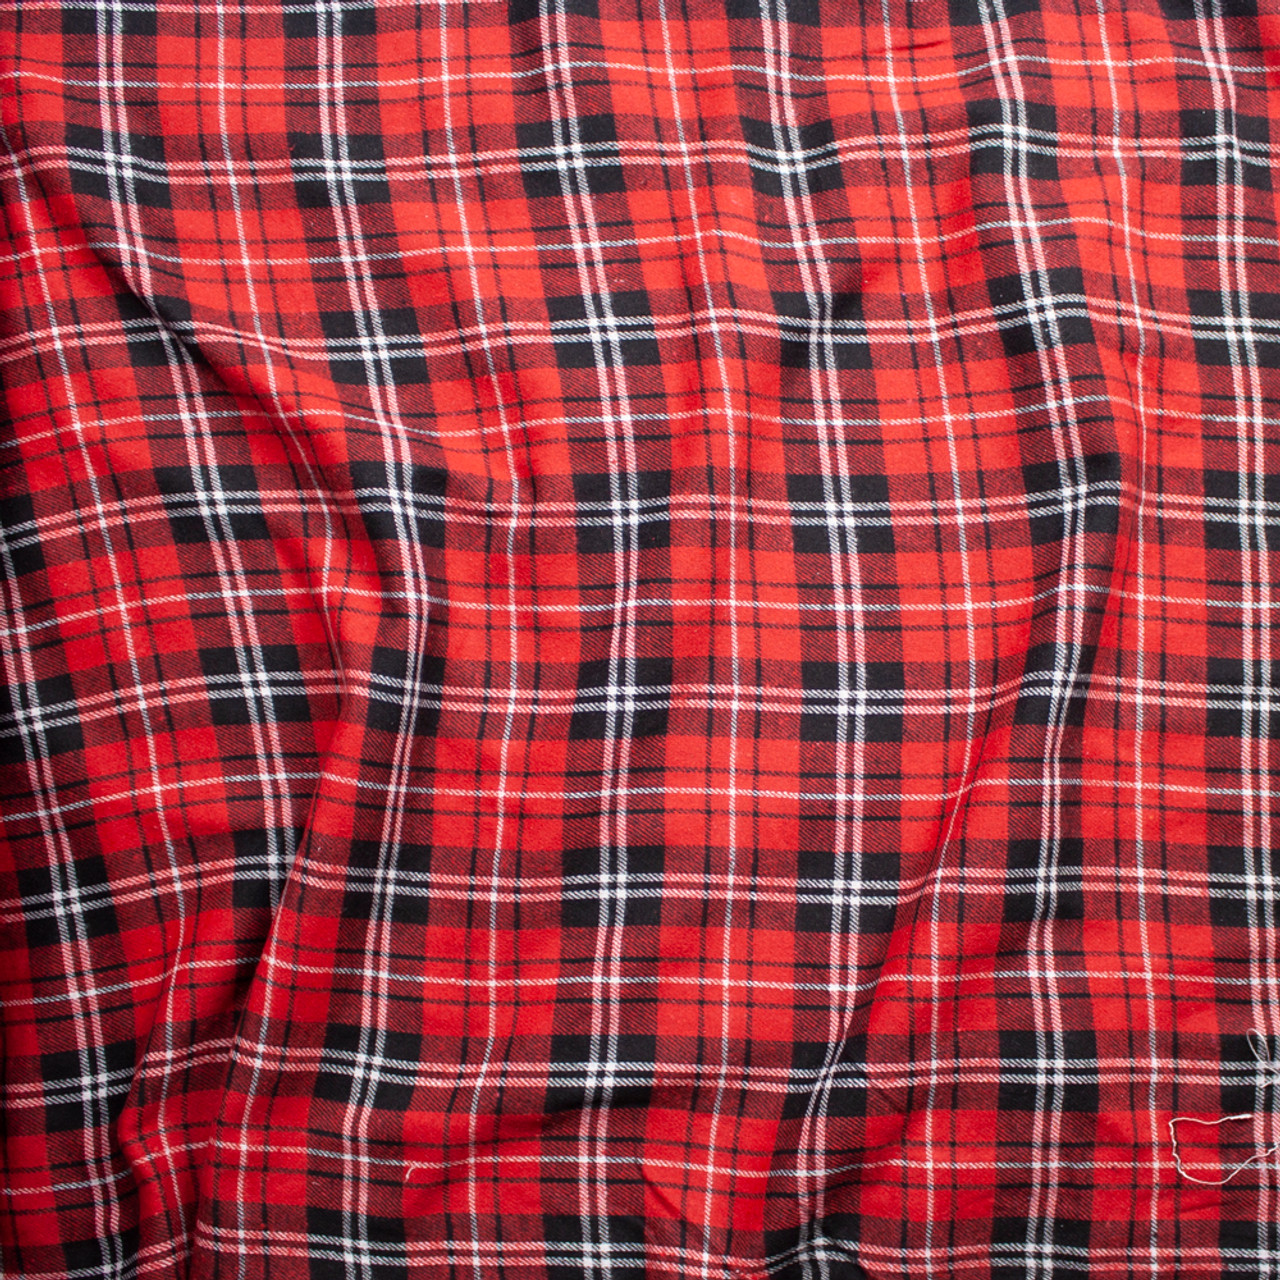 Flannel Plaid Black Red Gray White Cotton Flannel Fabric Print by Yard  D278.39 